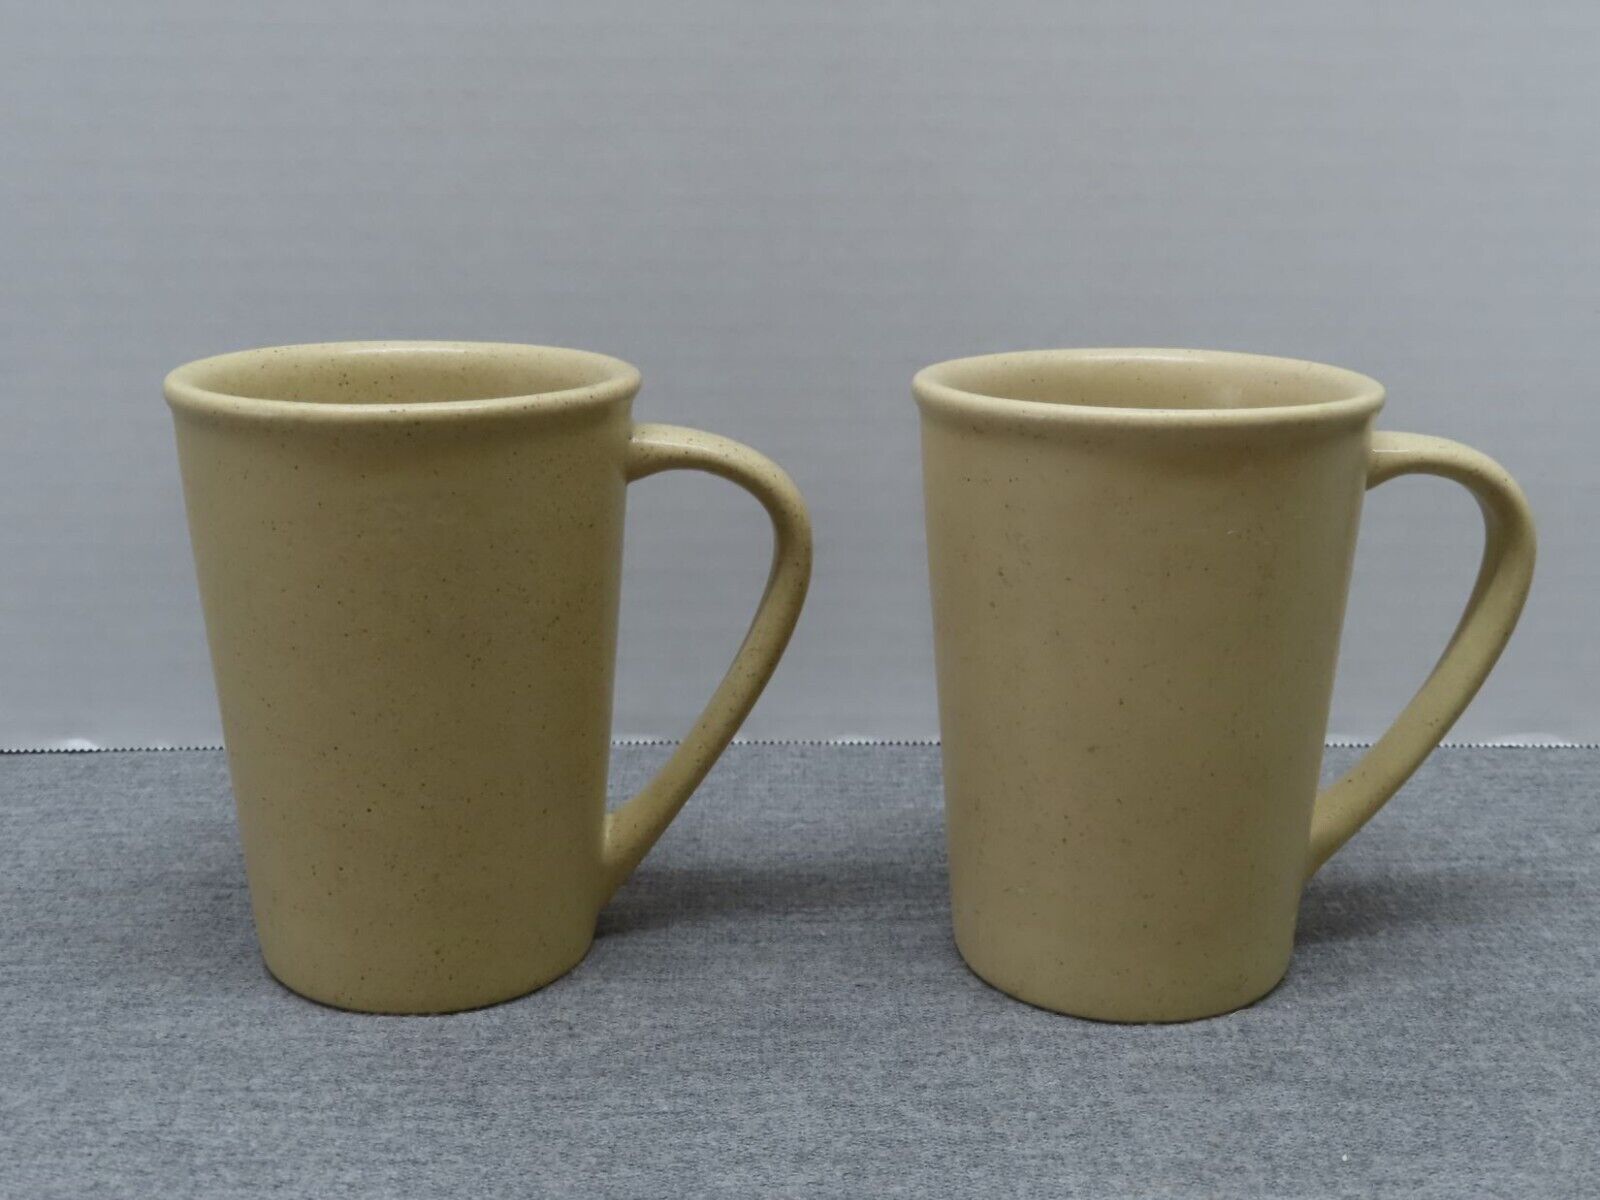 Lot of 2 Anfora Chena Conical Coffee Mugs Cups Mexico 12oz 100 Year Anniversary